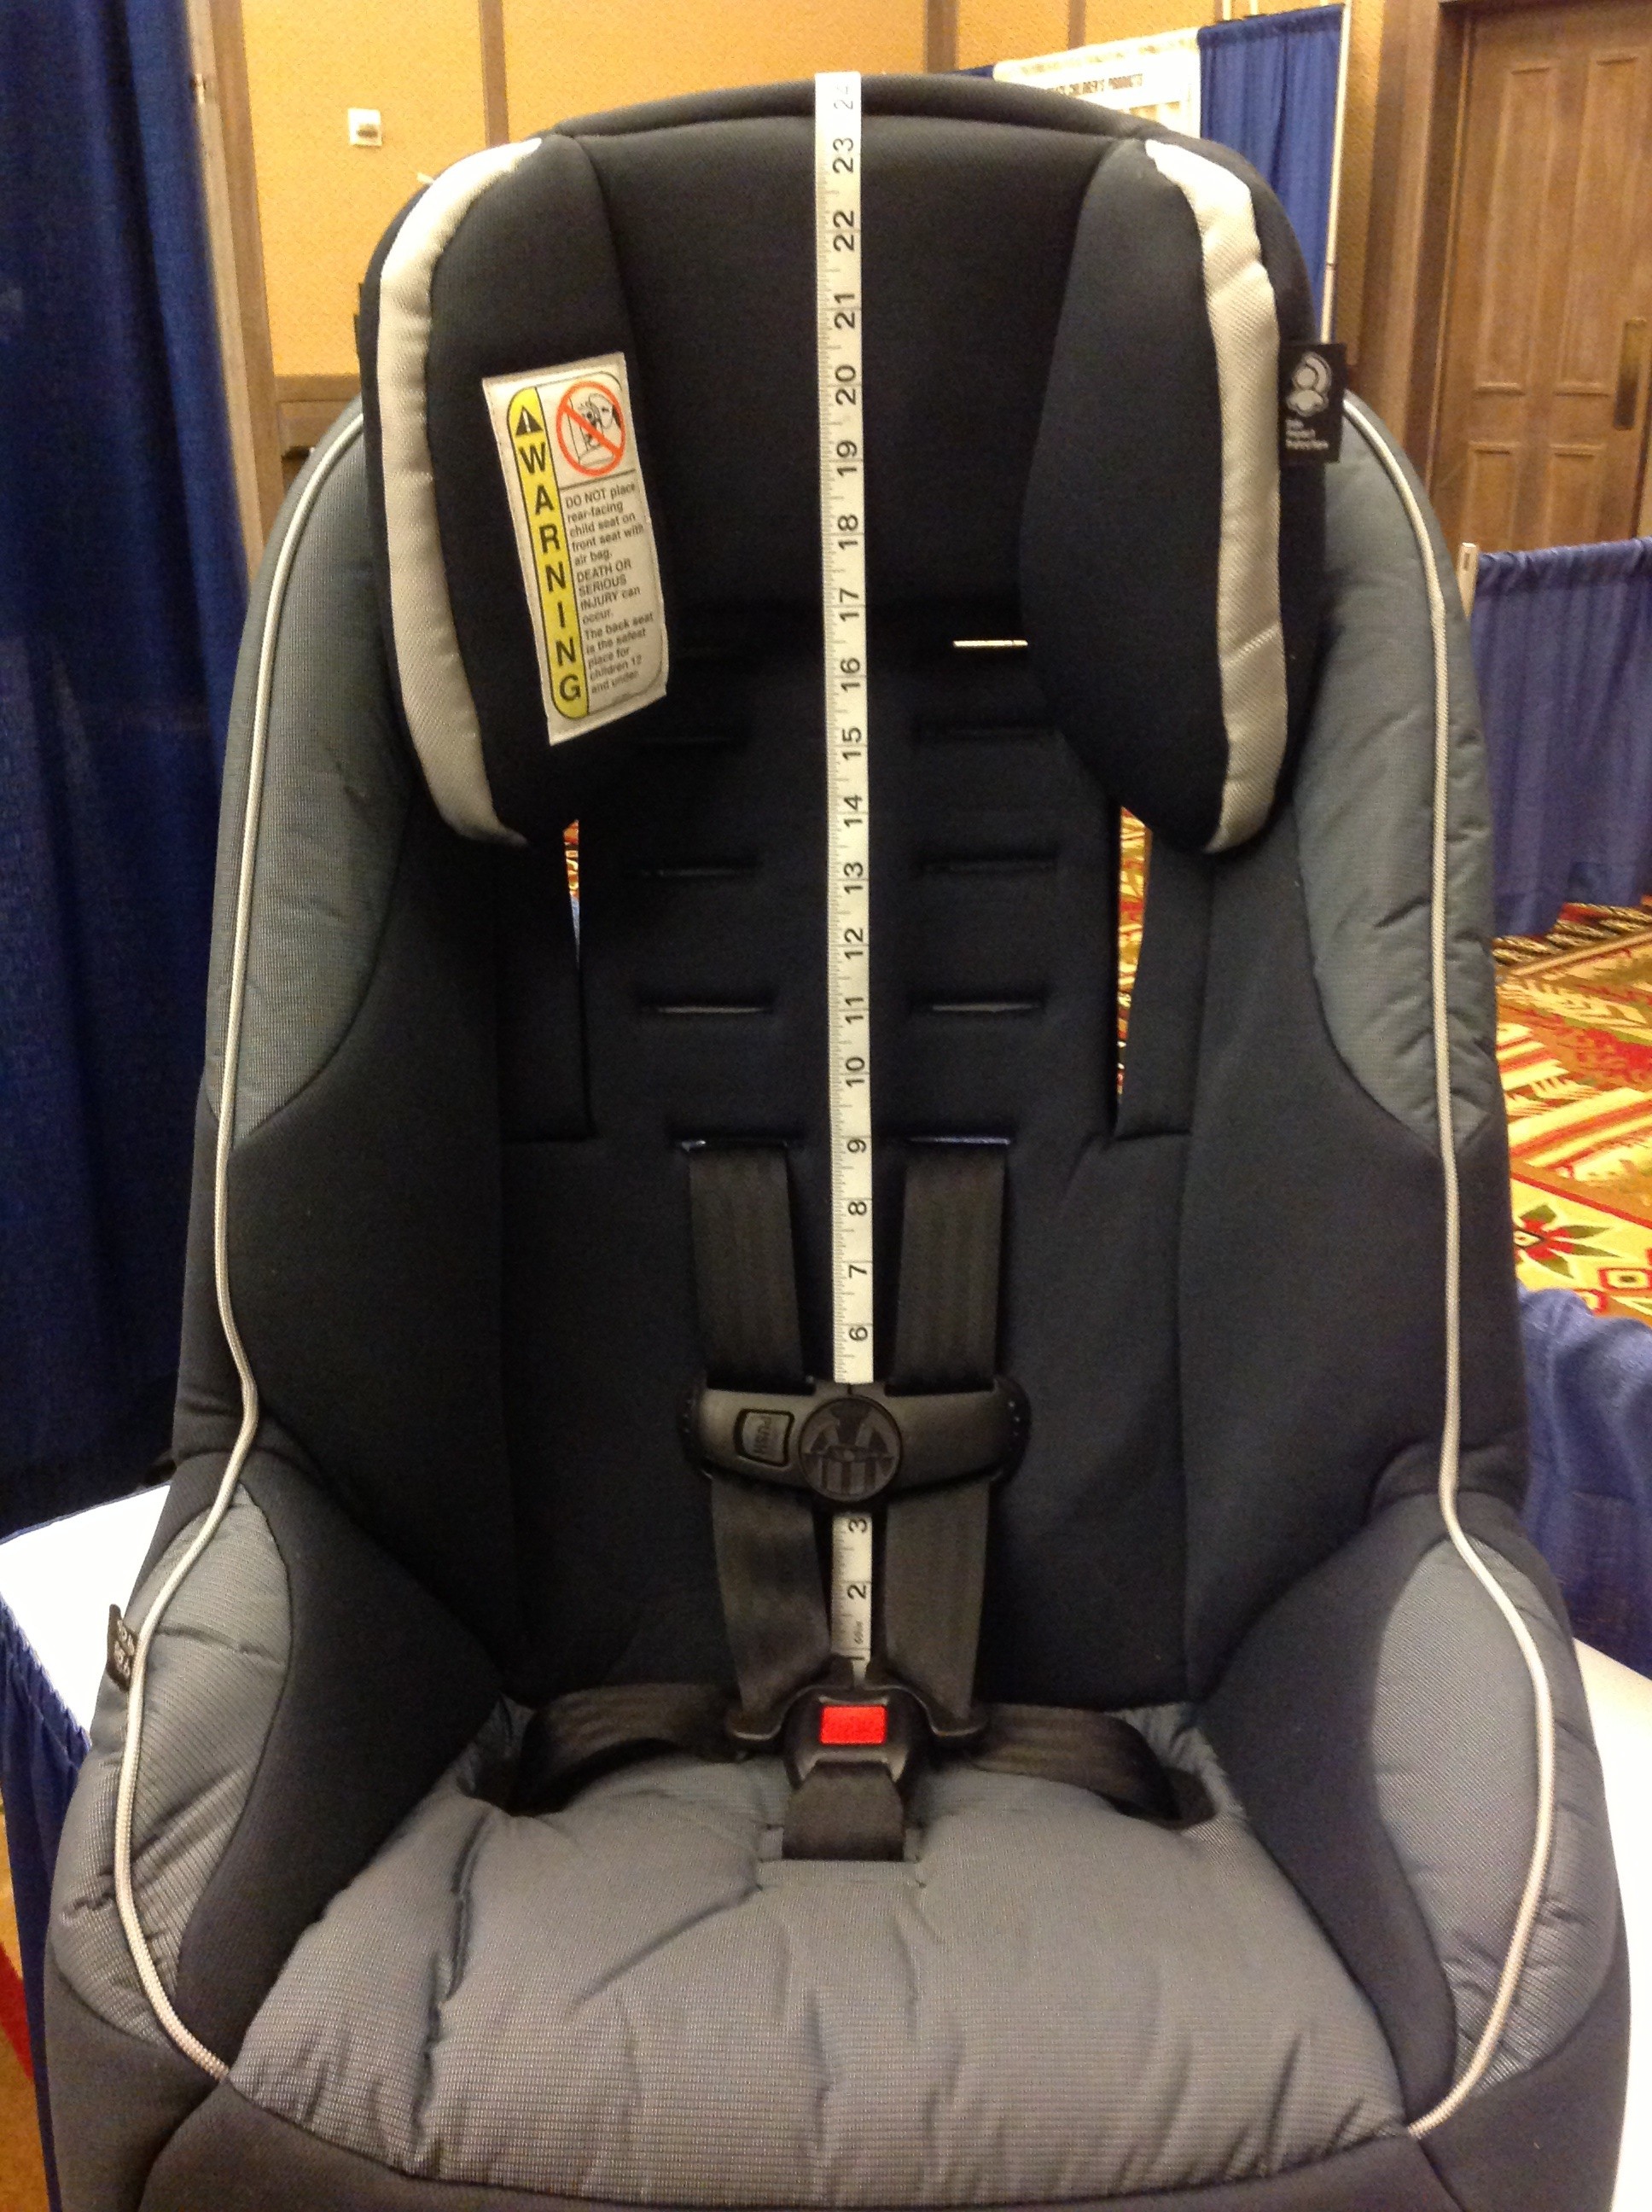 Rear Facing Convertible Seats Measurements Height Limits Weight Catblog - What Is The Height And Weight Limit For Rear Facing Car Seat